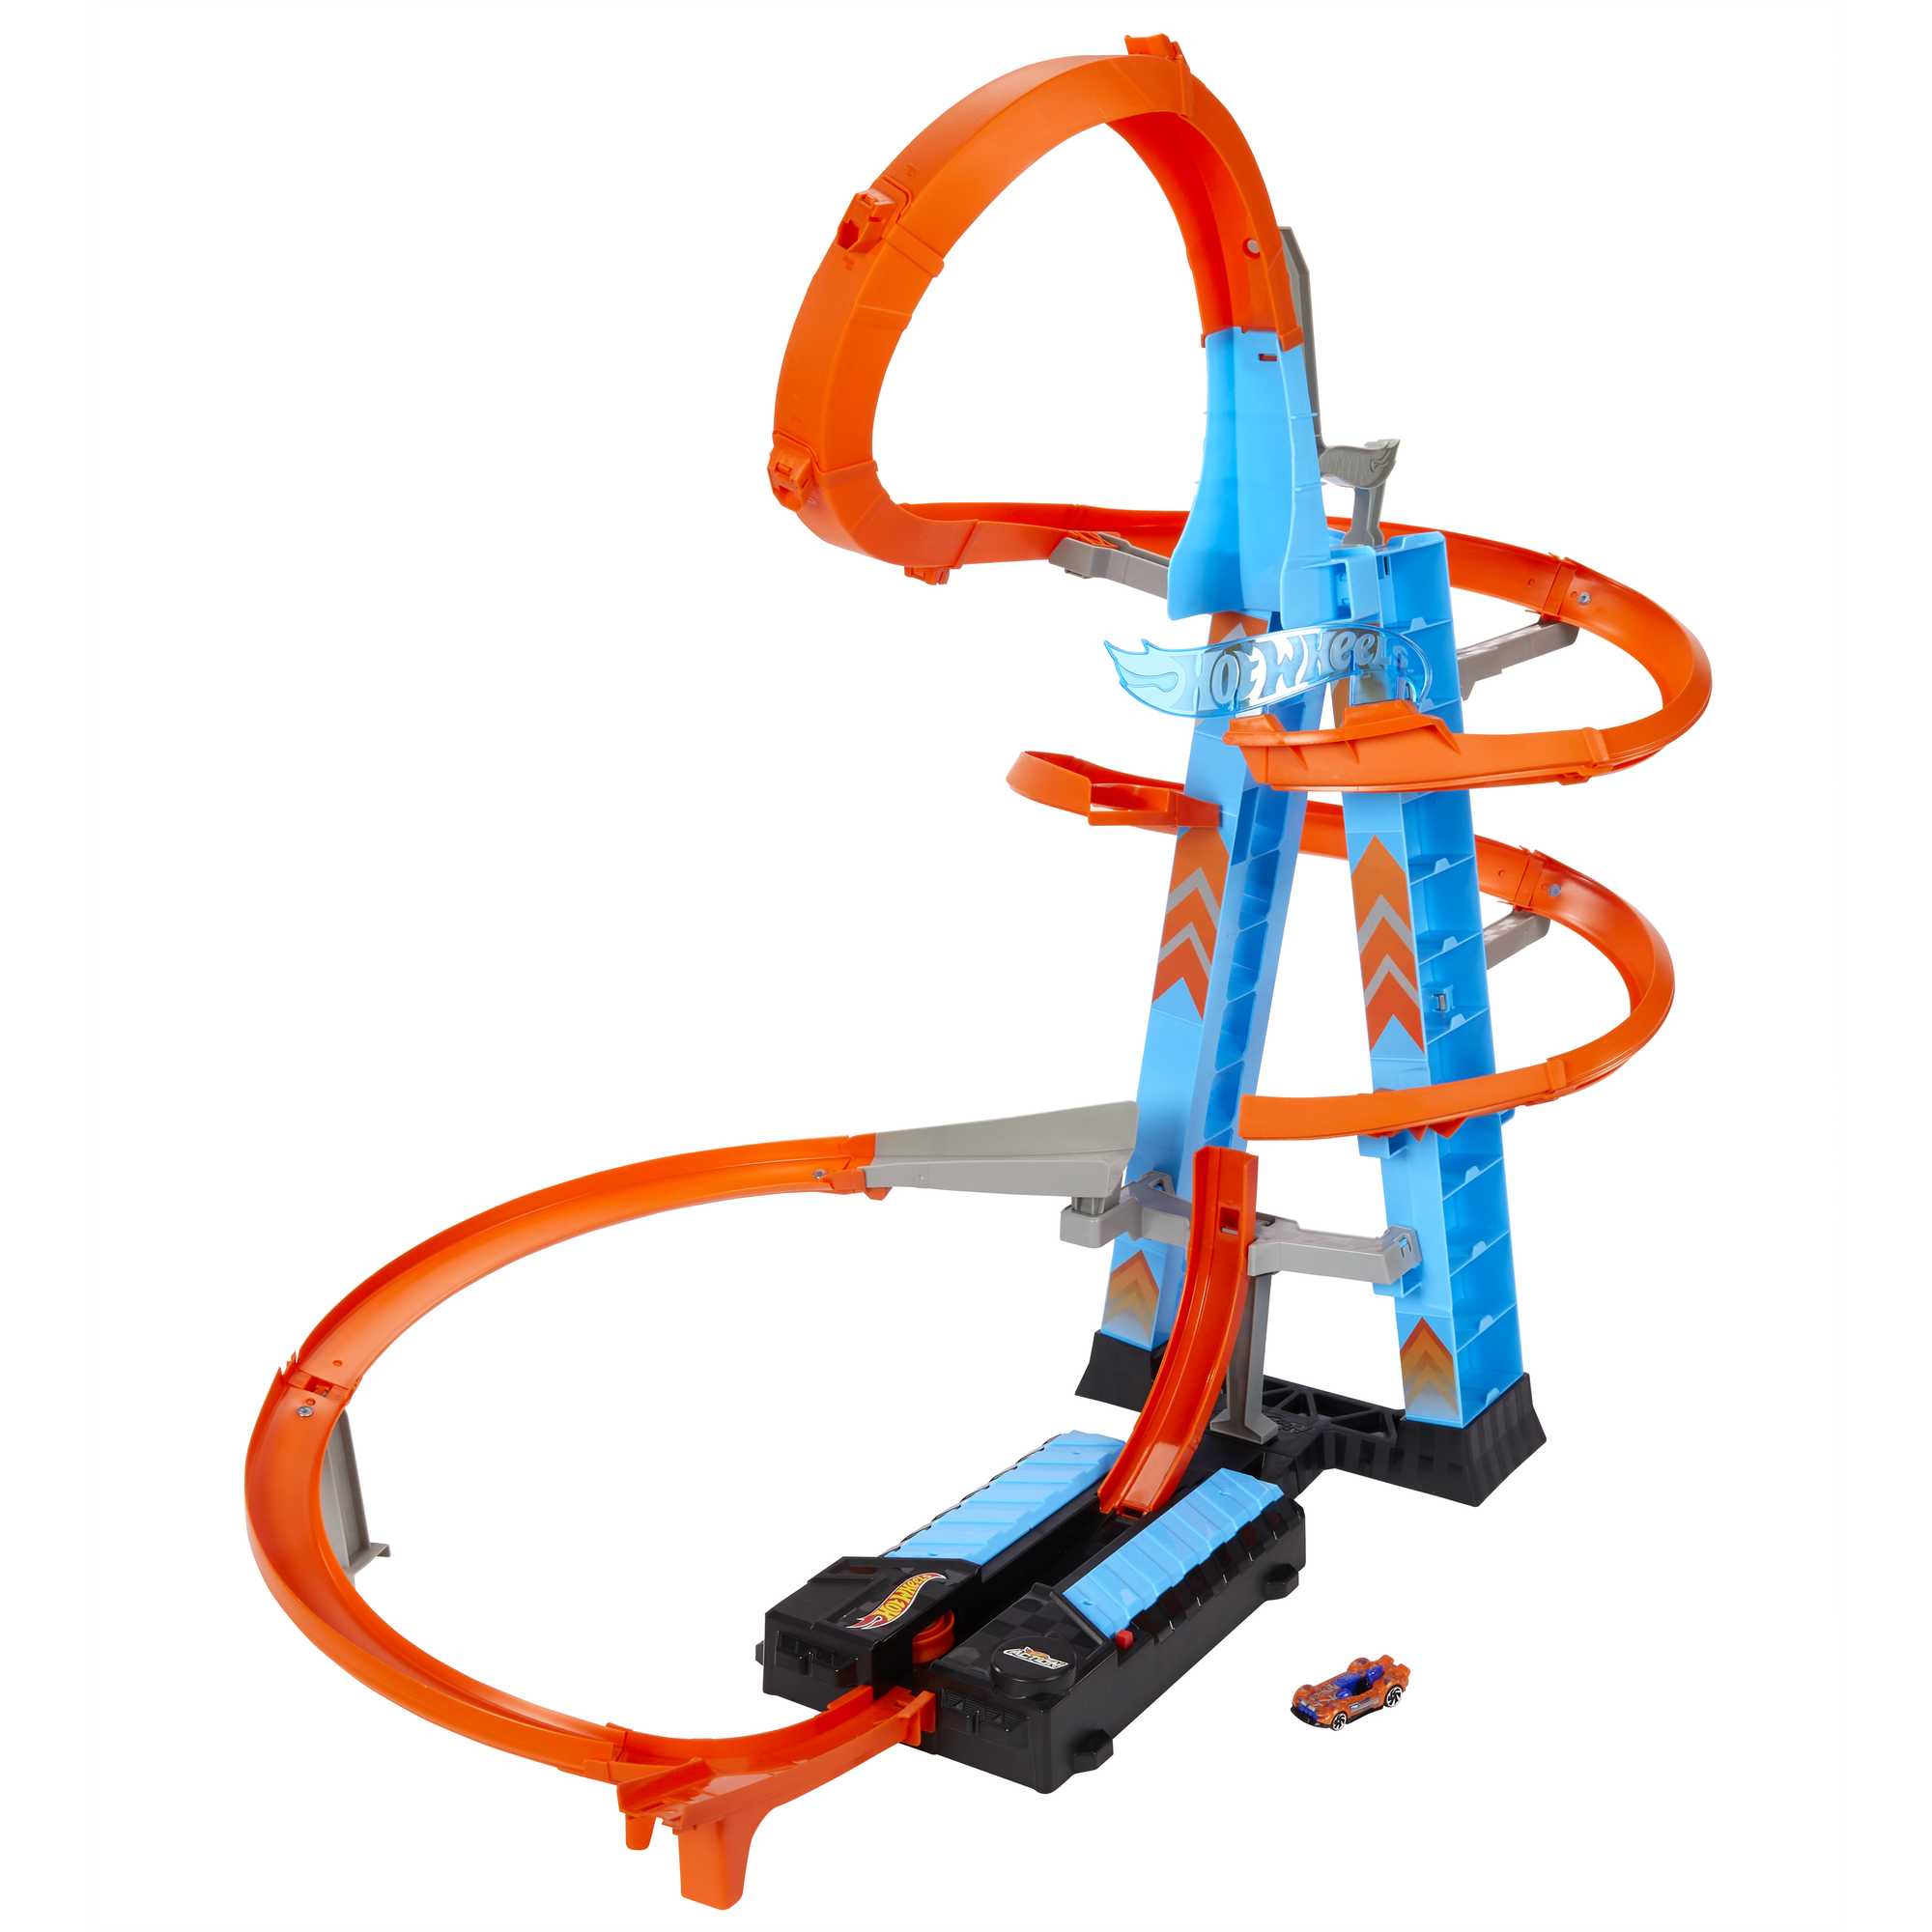 Hot Wheels Sky Crash Tower Motorized Track Set with Toy Car, Stores 20+ 1:64 Scale Cars, for Kids 5-10 years old - image 1 of 8